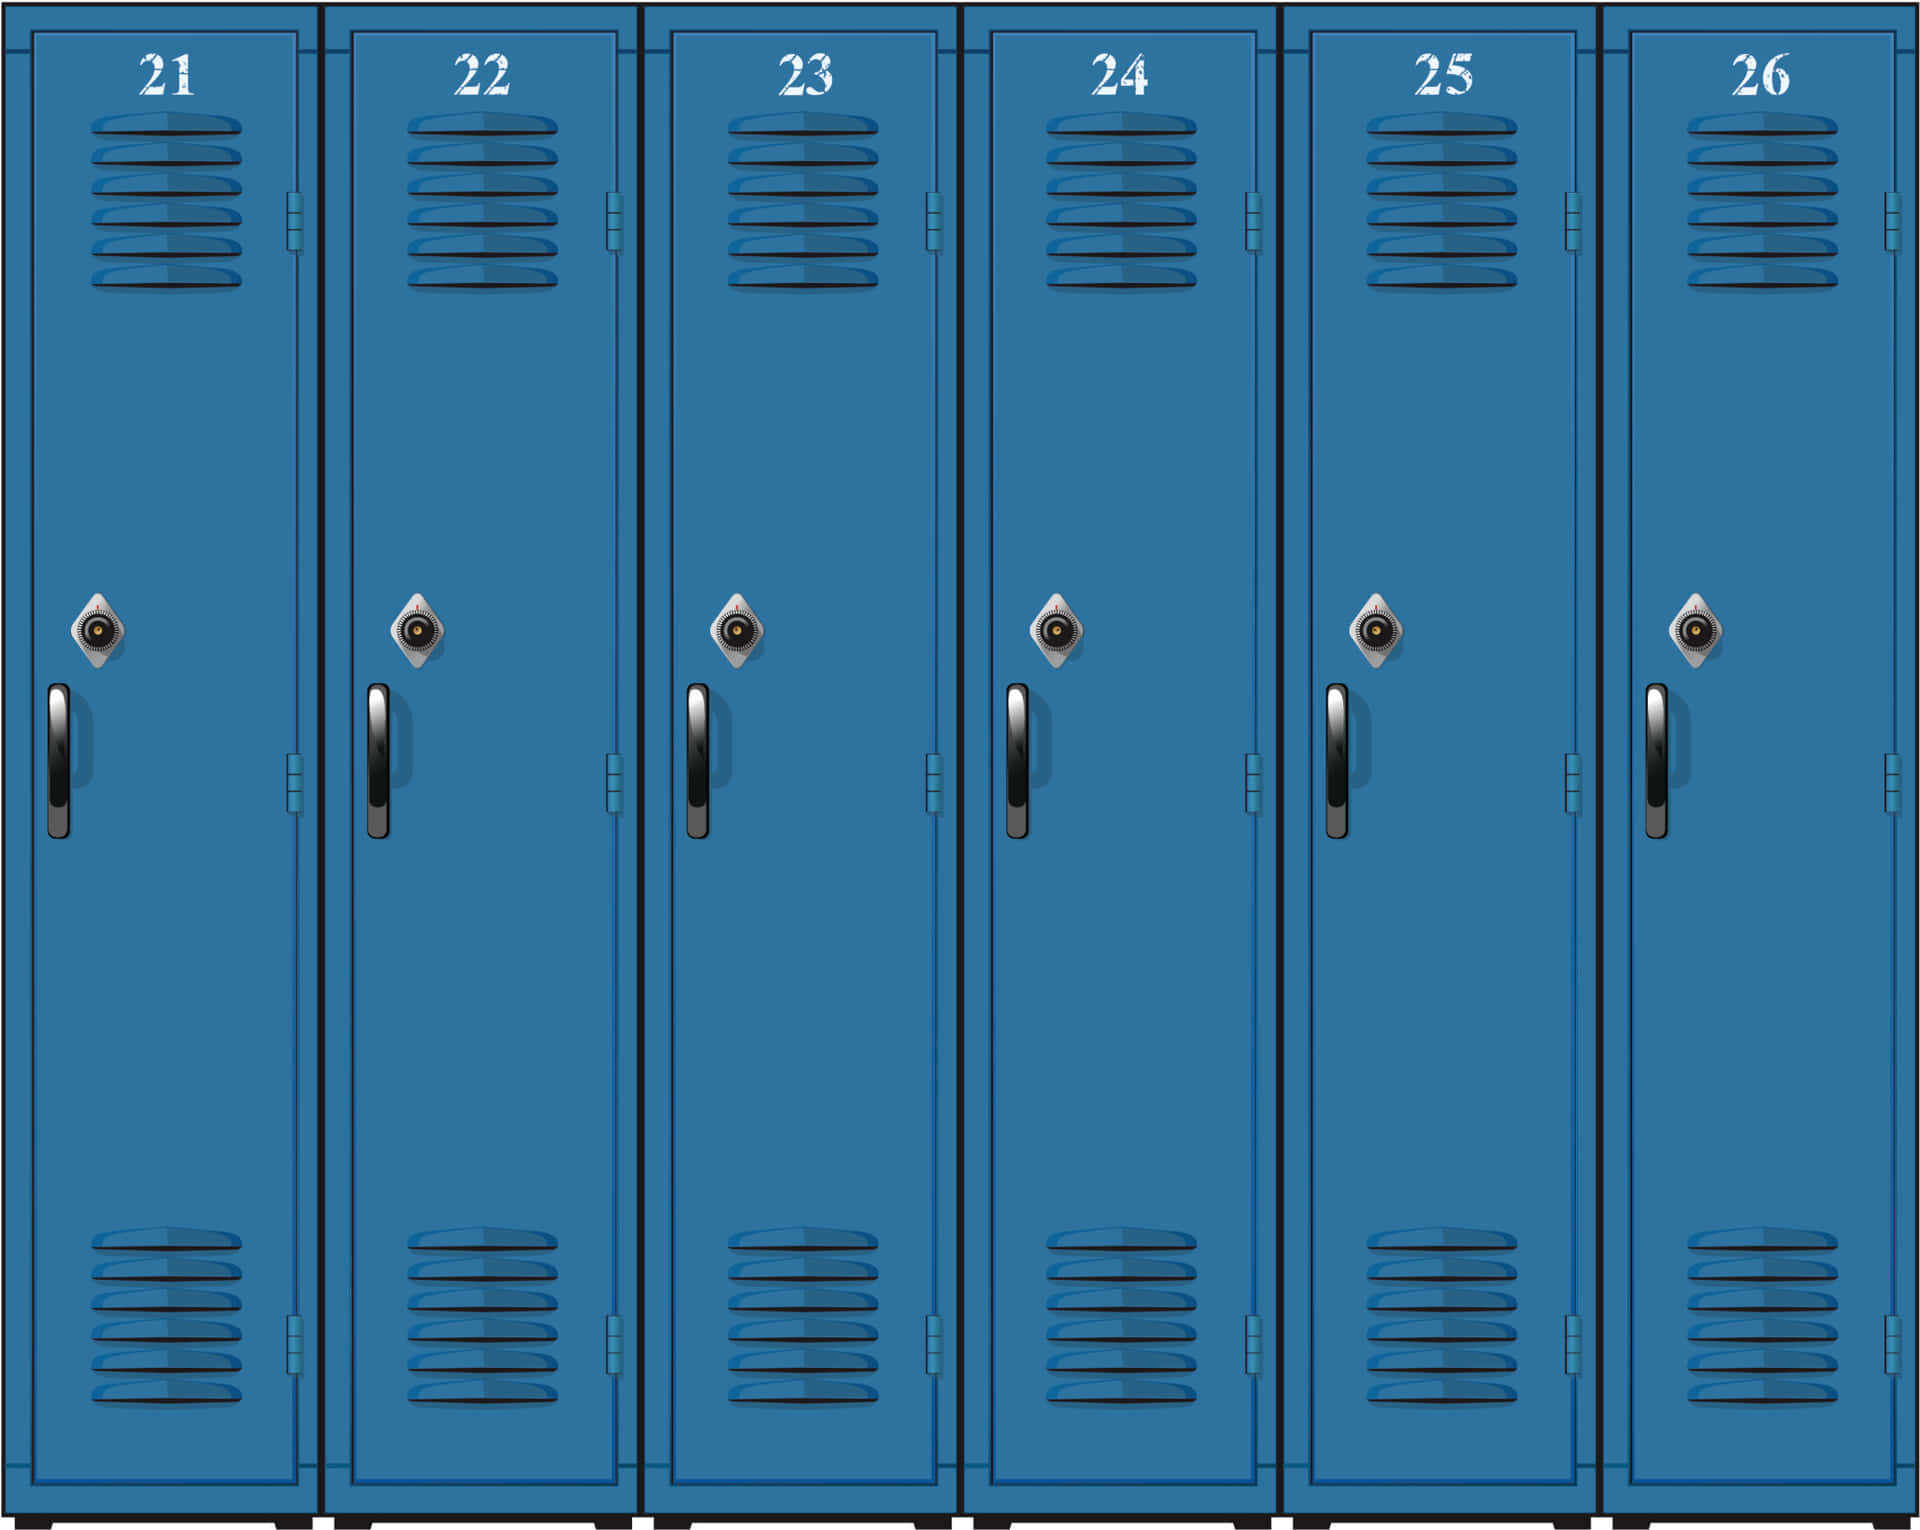 A large variety of school lockers ready for students.